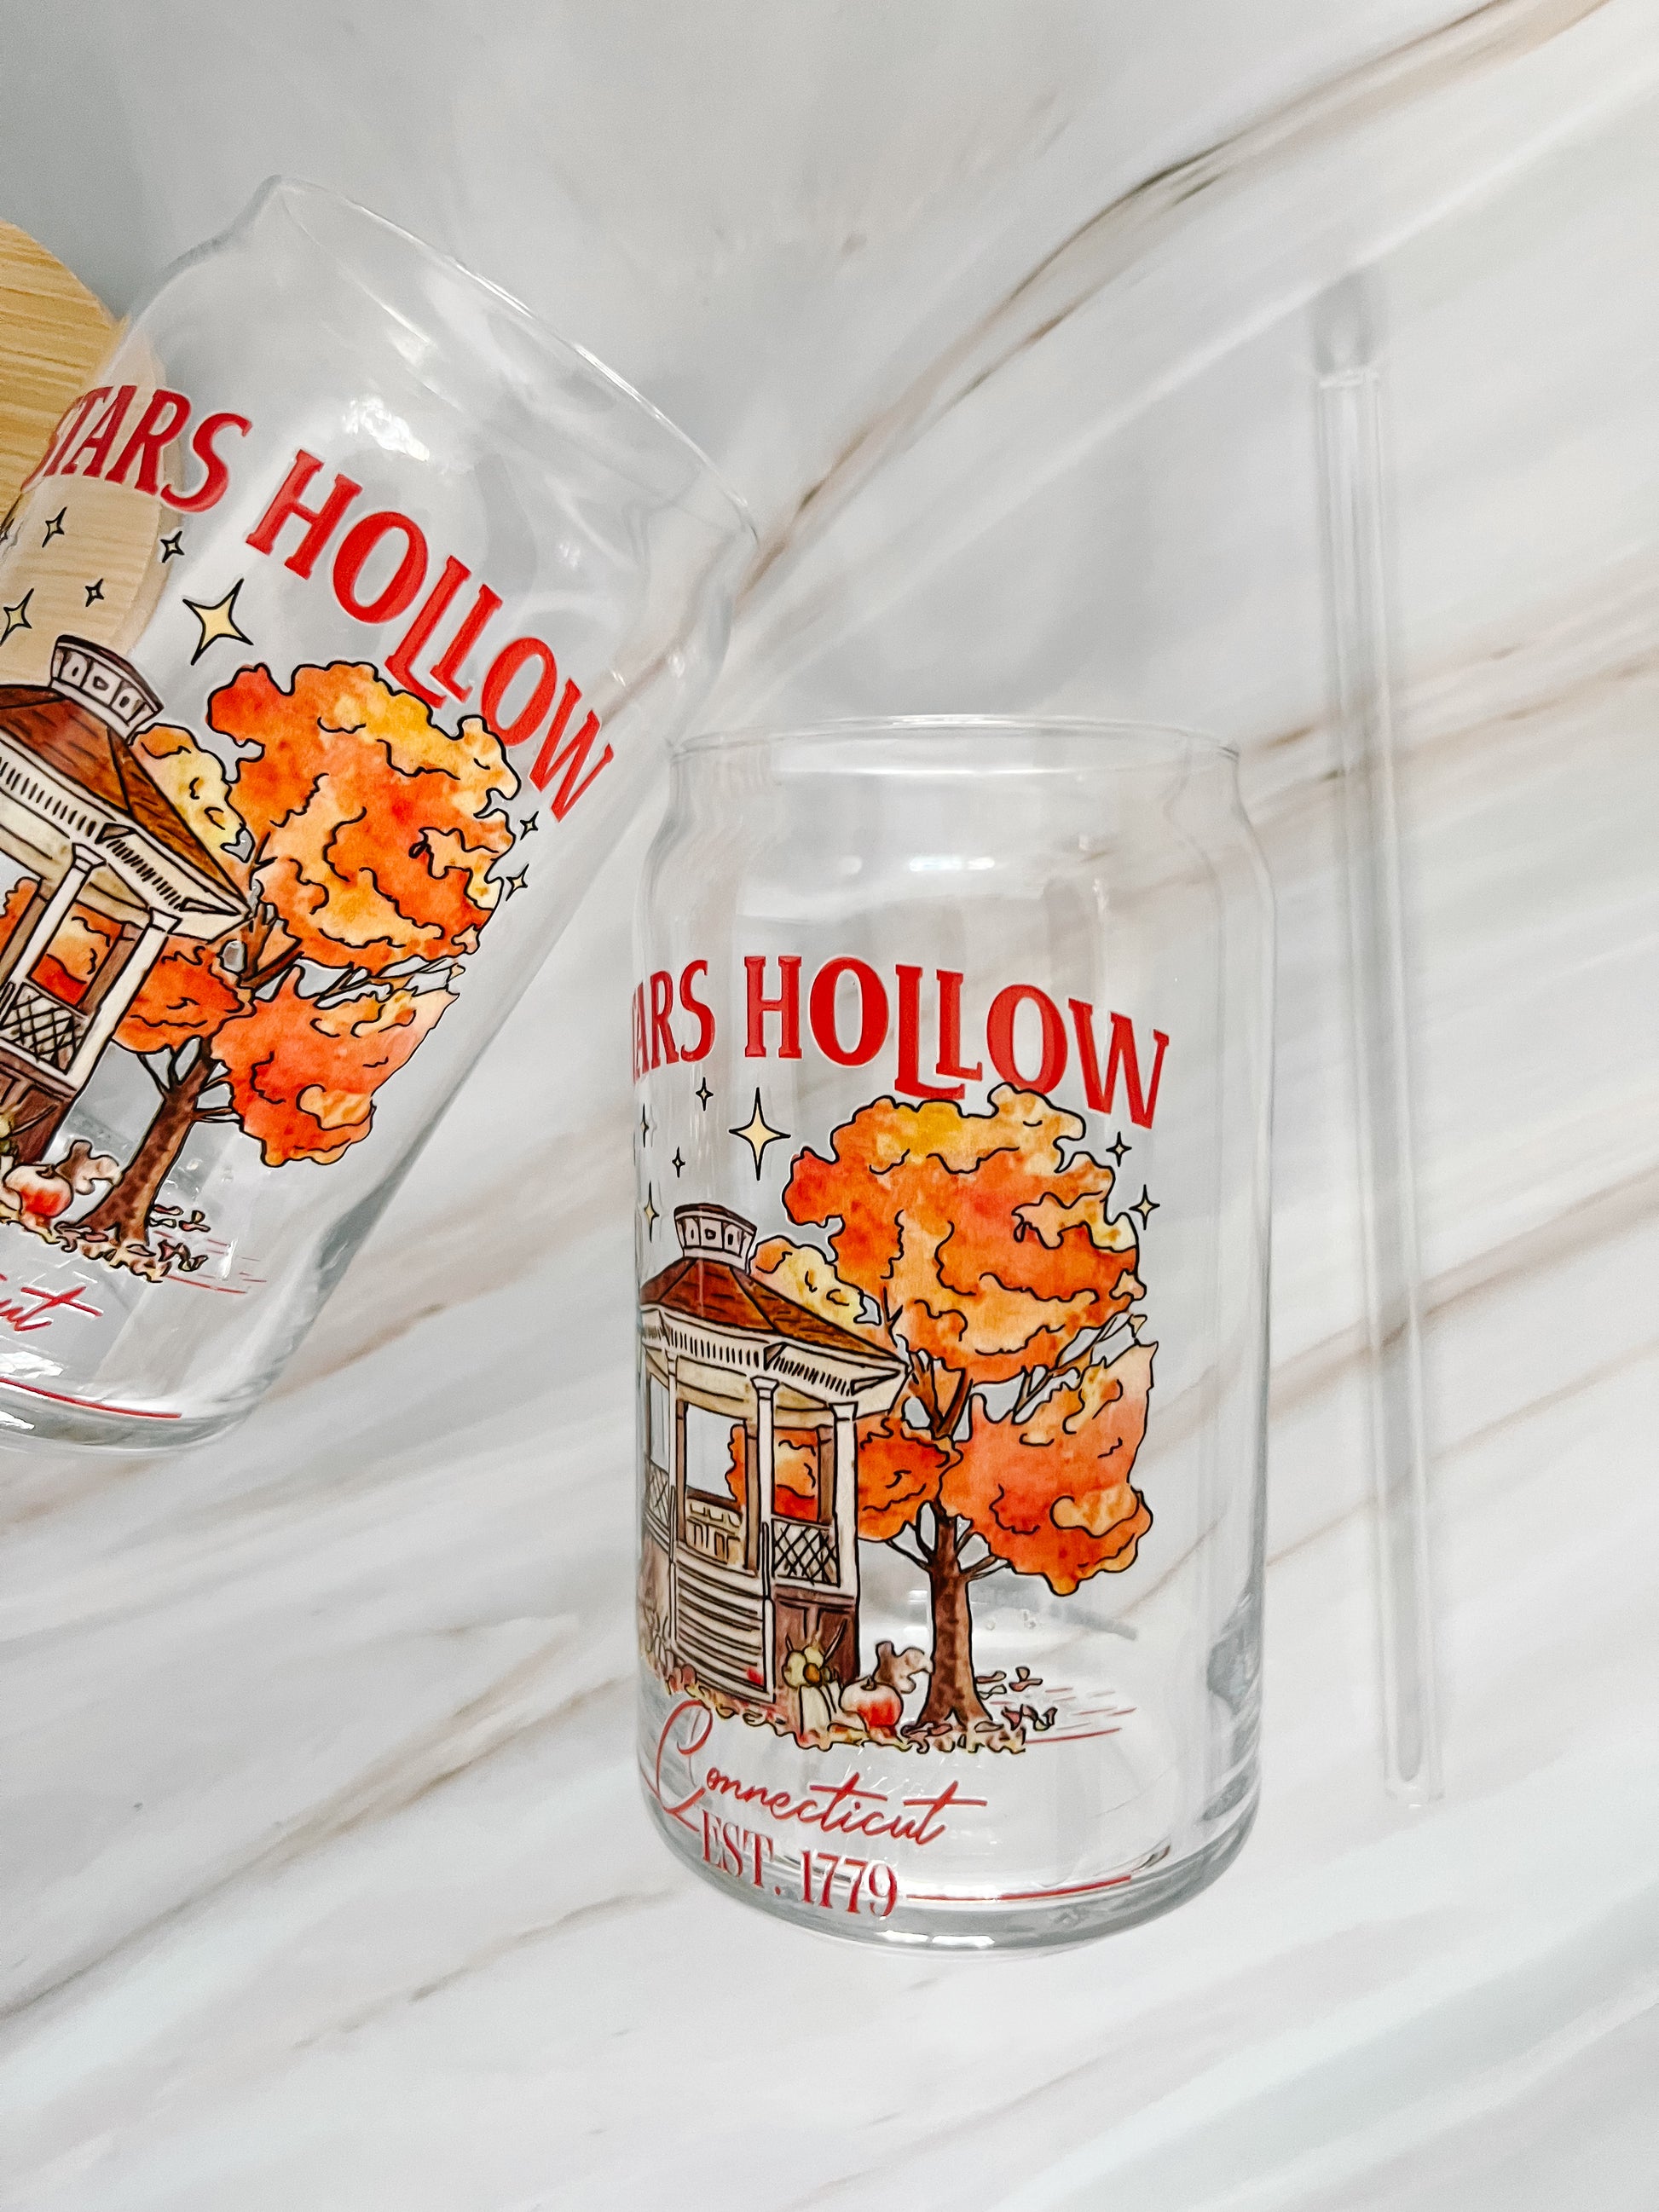 stars hollow Connecticut 16oz glass cup with glass straw and bamboo lid gilmore girls gazebo 